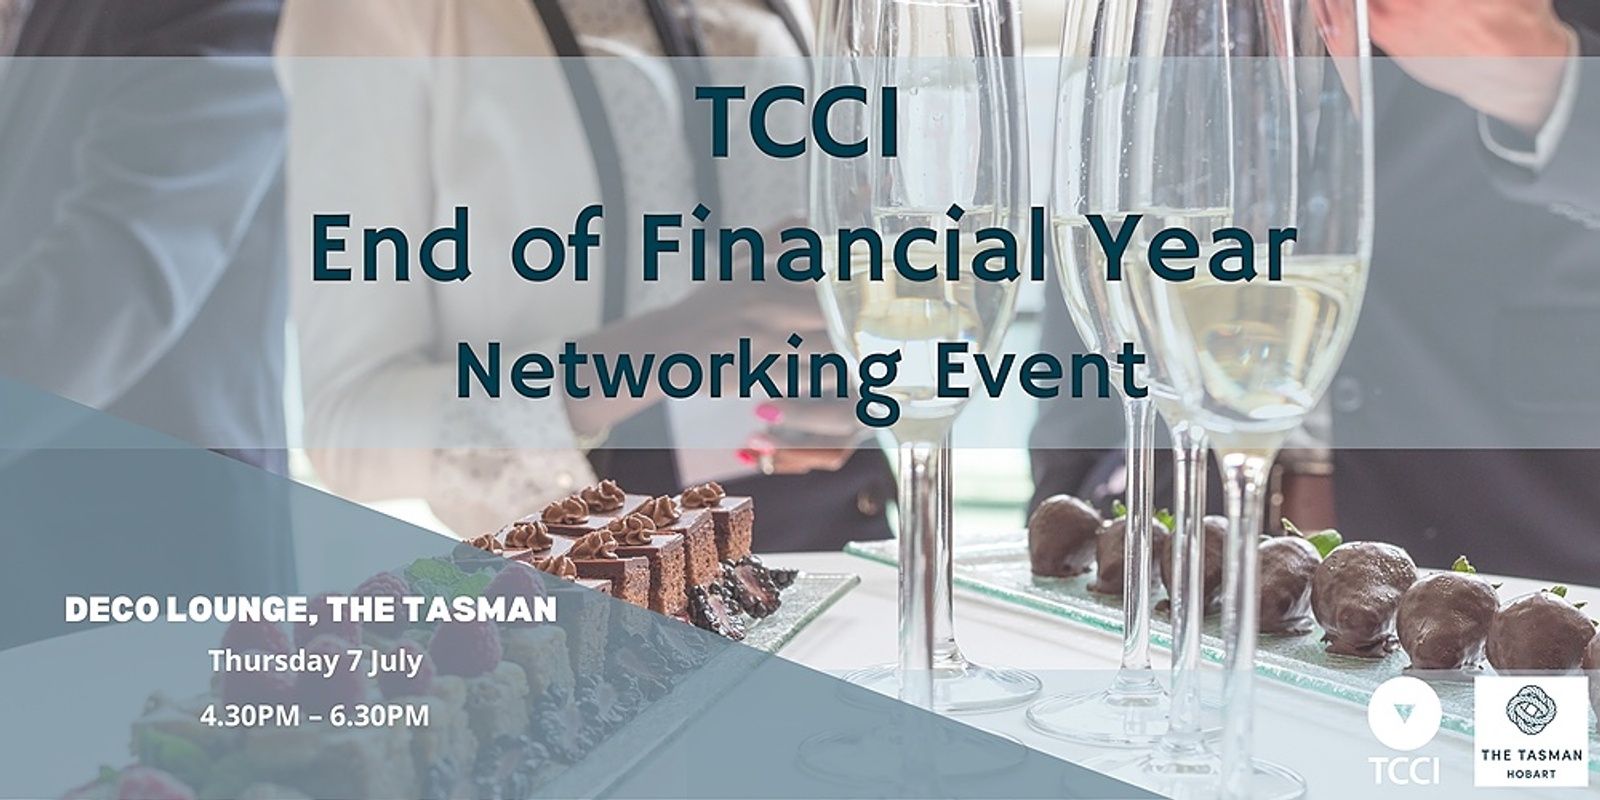 Banner image for TCCI EOFY Networking Event